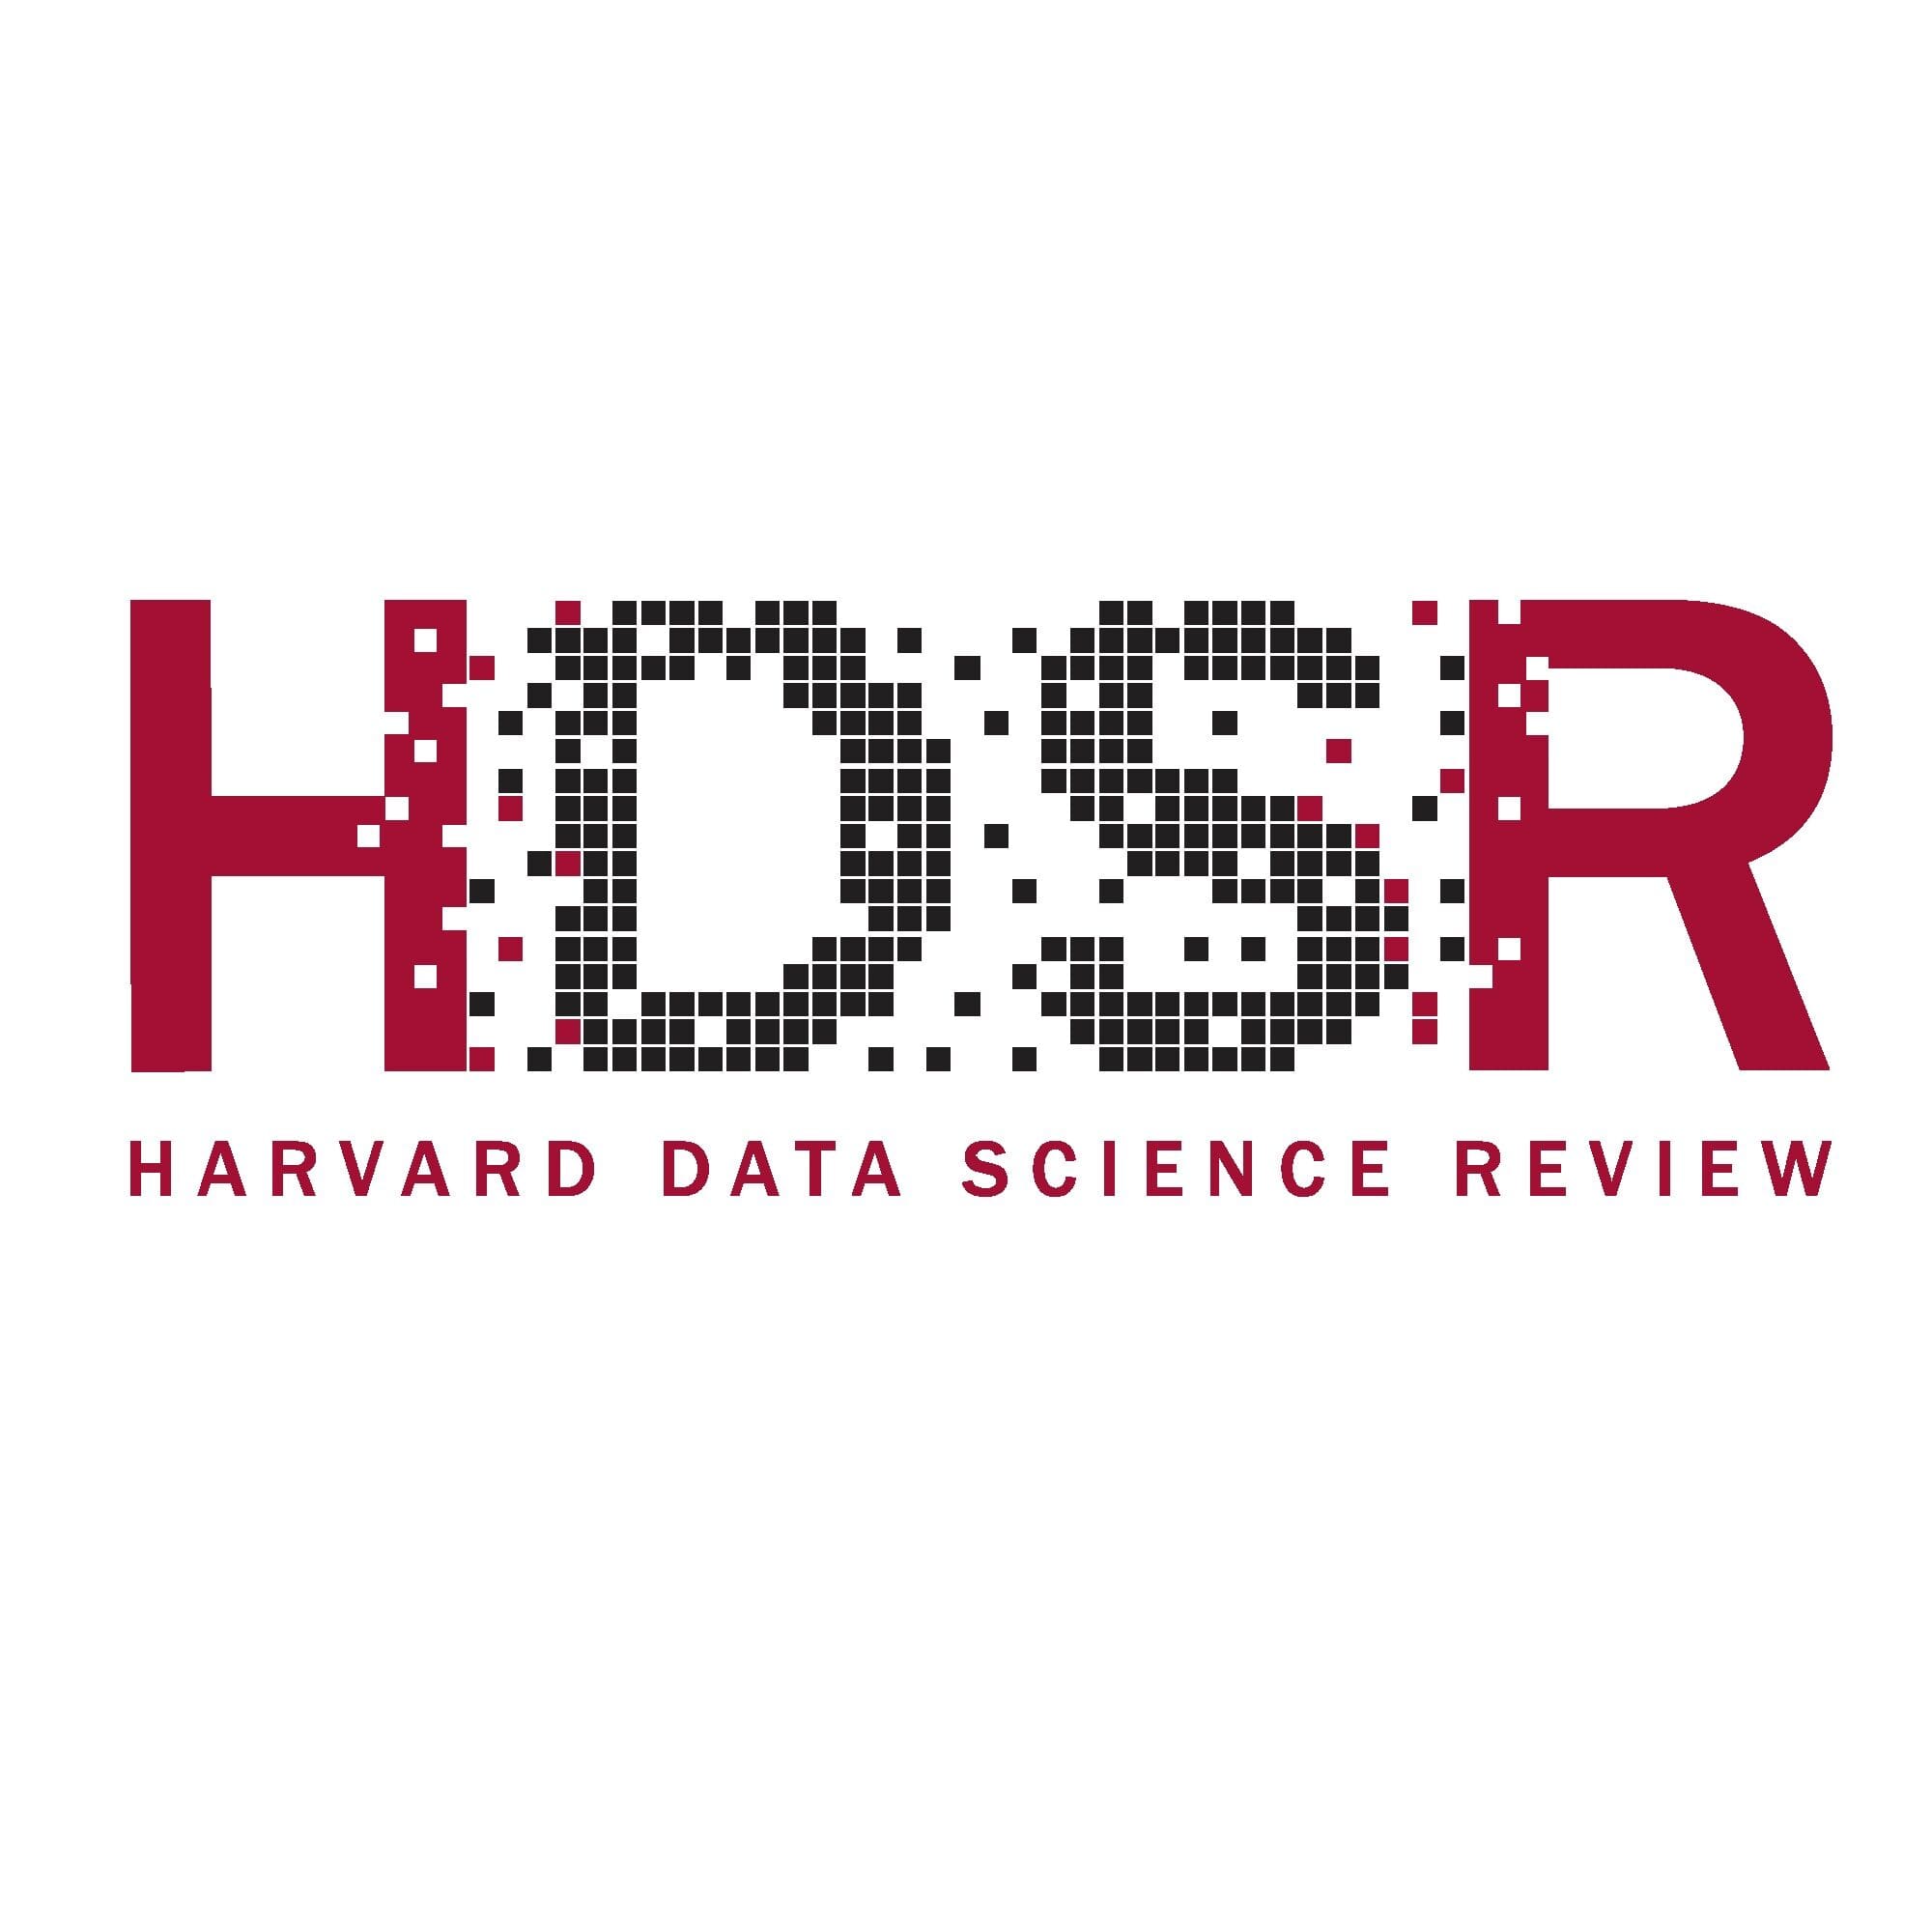 The Harvard Data Science Review Podcast